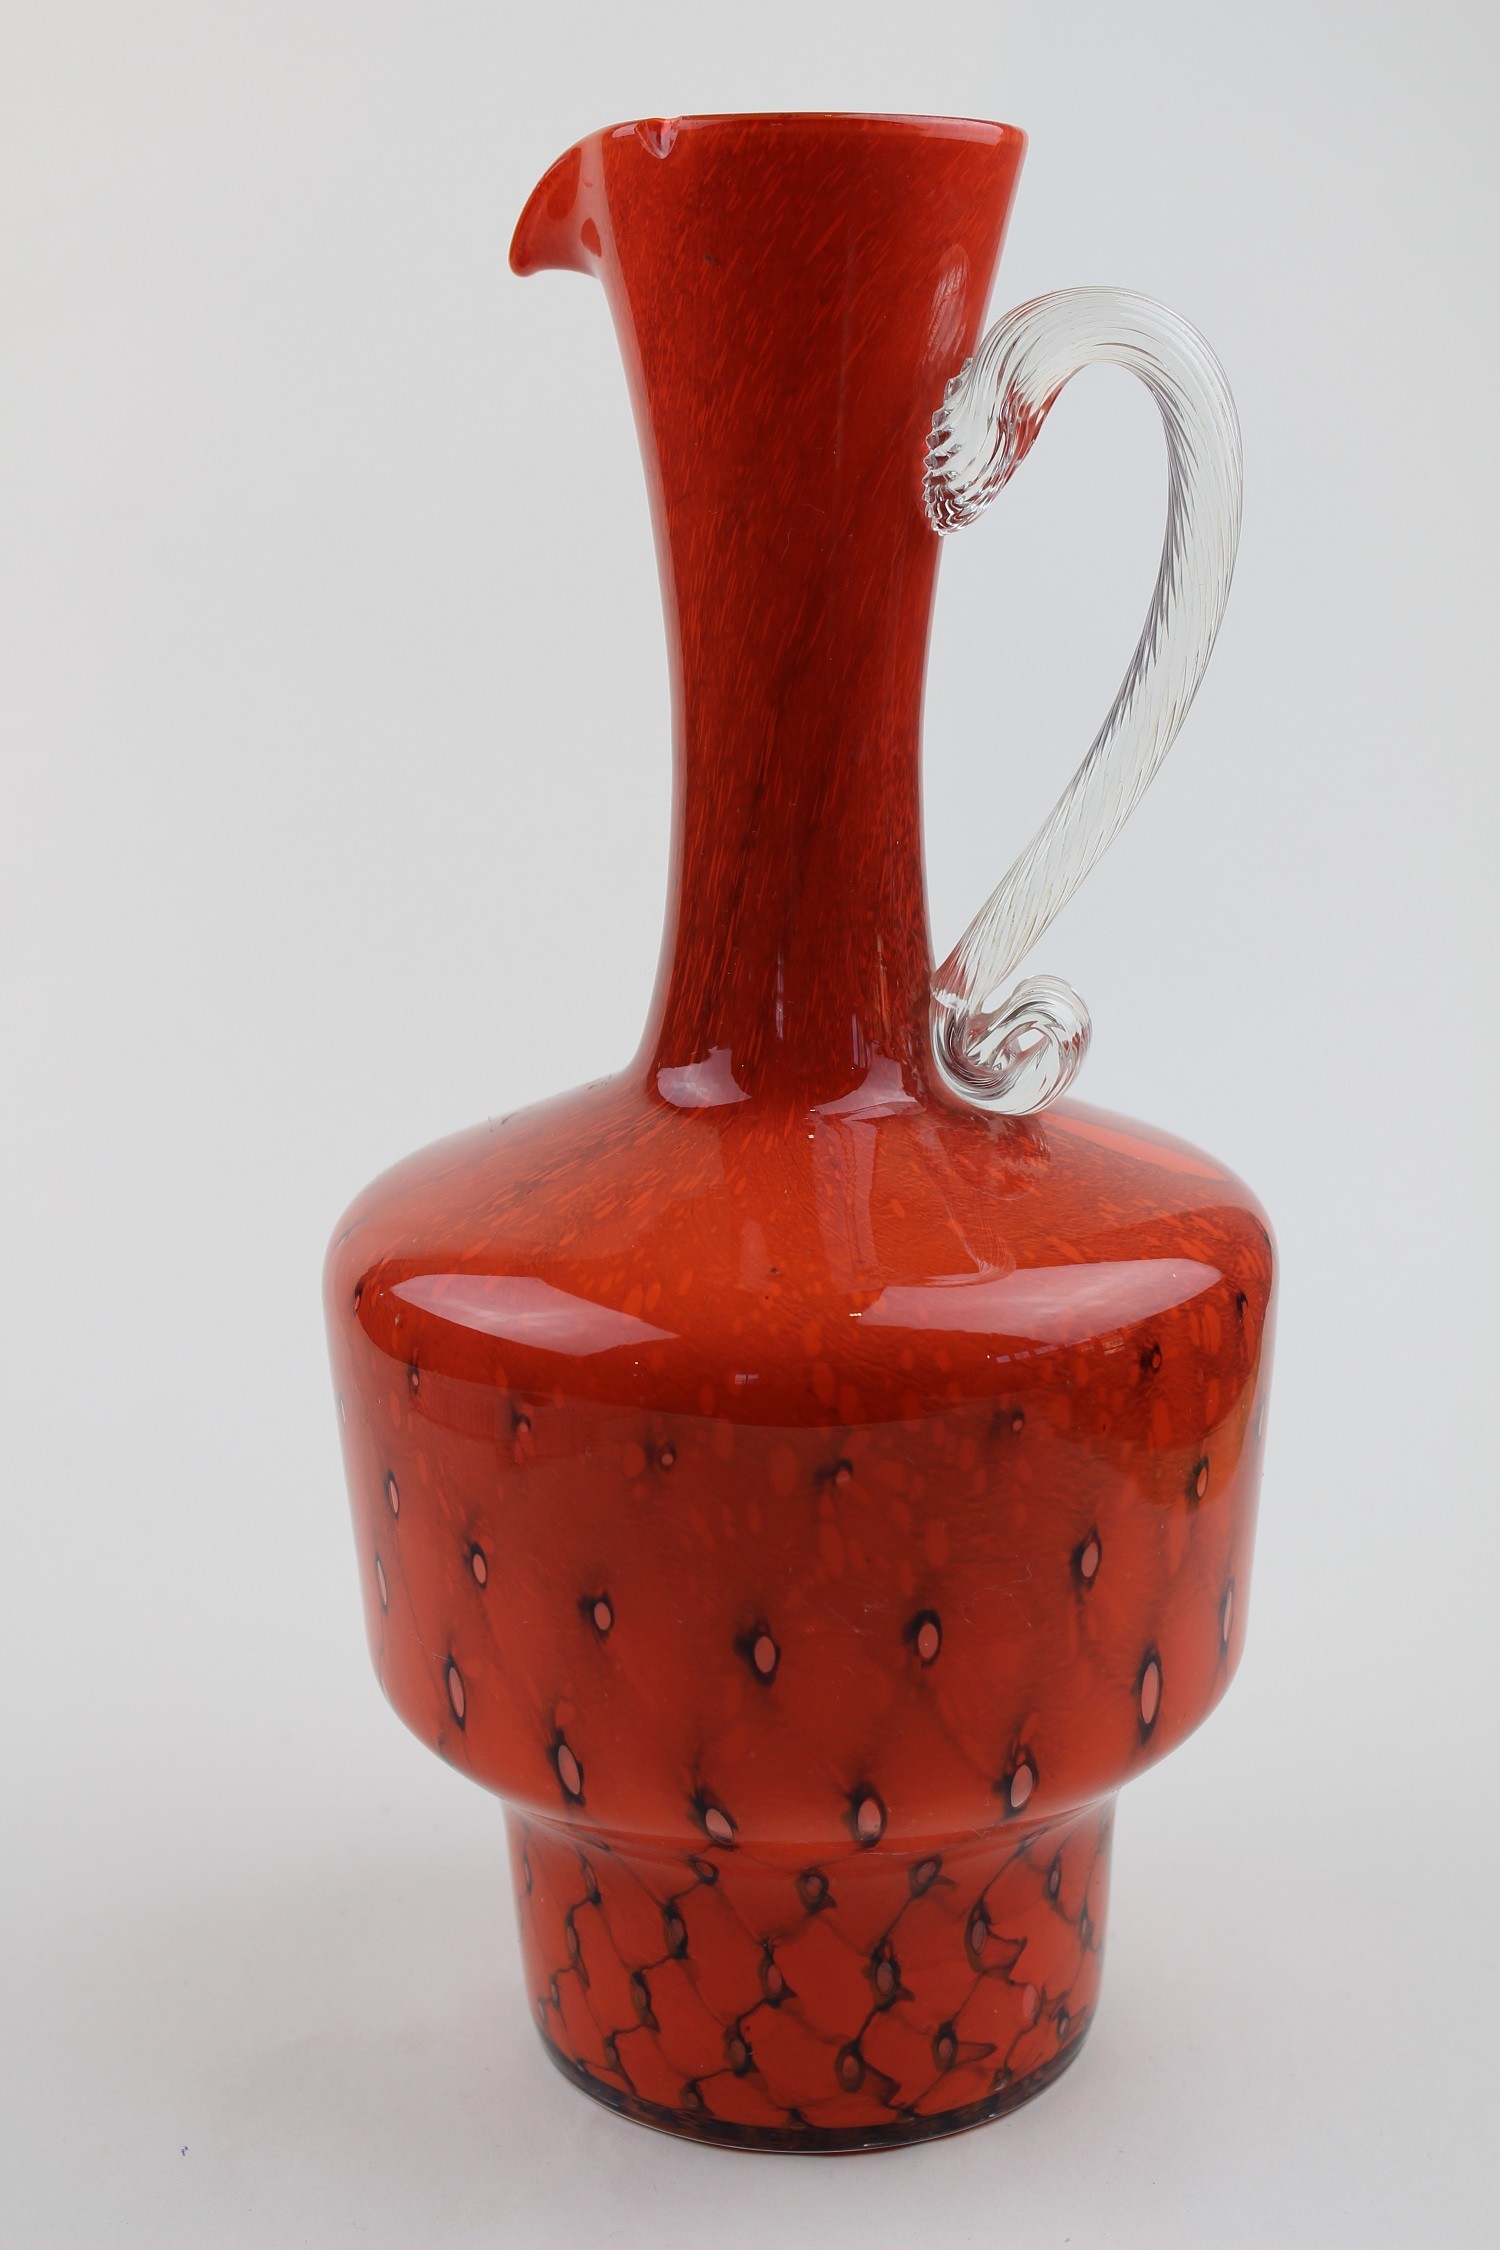 Rote Vase/Karaffe mit Muster (Museum Baruther Glashütte CC BY-NC-SA)